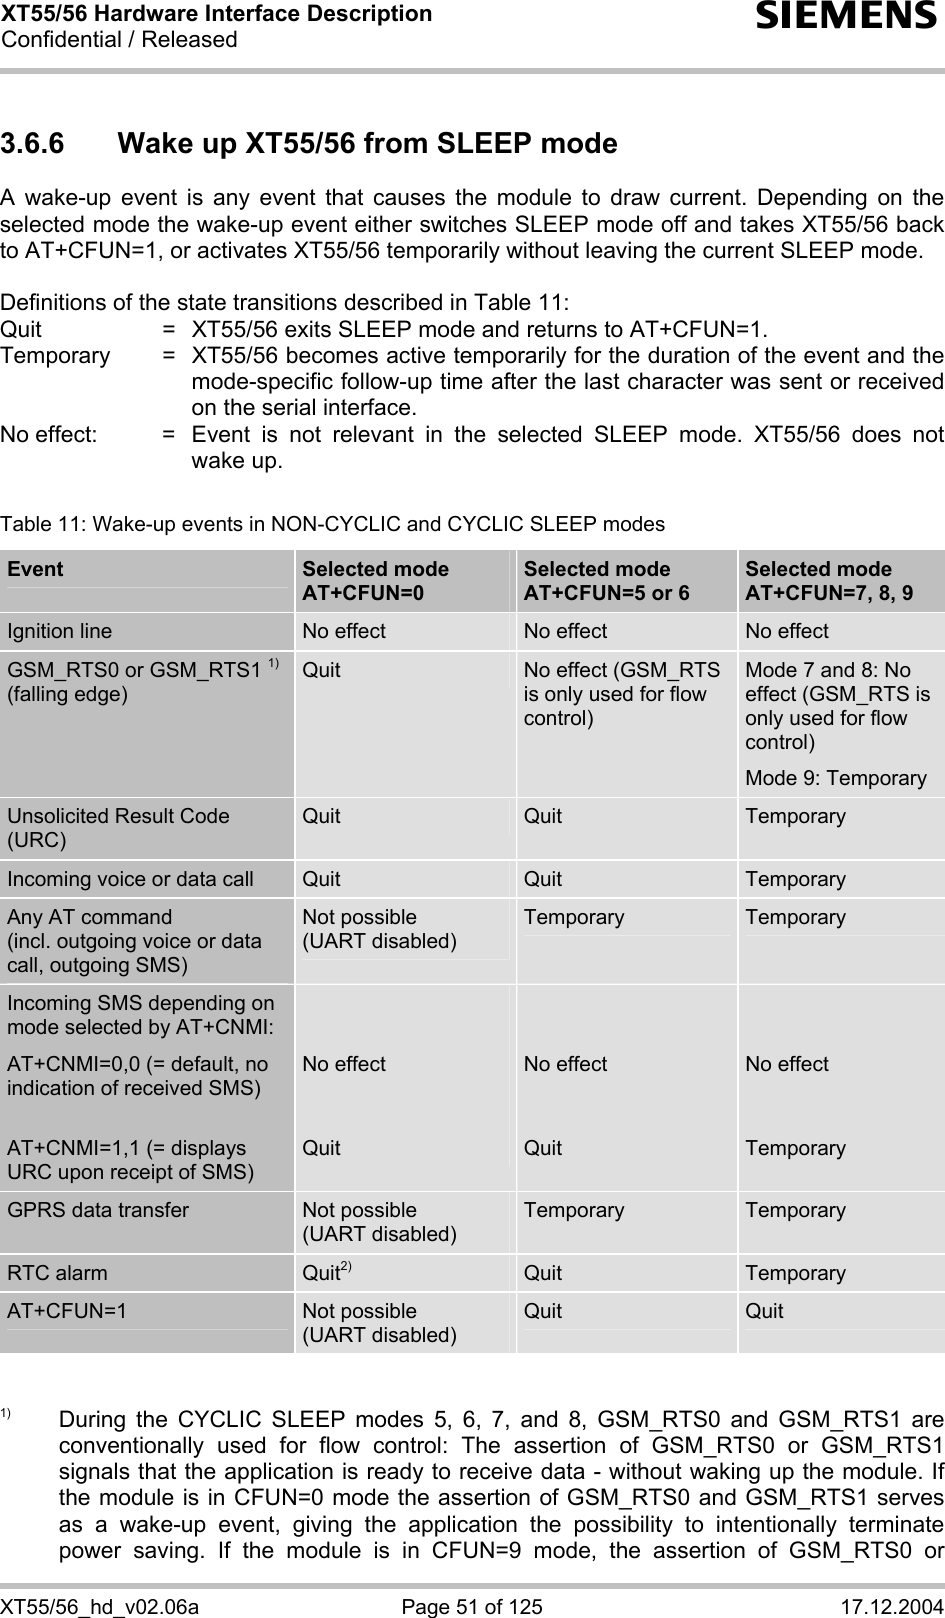 XT55/56 Hardware Interface Description Confidential / Released s XT55/56_hd_v02.06a  Page 51 of 125  17.12.2004 3.6.6  Wake up XT55/56 from SLEEP mode A wake-up event is any event that causes the module to draw current. Depending on the selected mode the wake-up event either switches SLEEP mode off and takes XT55/56 back to AT+CFUN=1, or activates XT55/56 temporarily without leaving the current SLEEP mode.  Definitions of the state transitions described in Table 11: Quit  =  XT55/56 exits SLEEP mode and returns to AT+CFUN=1. Temporary  =  XT55/56 becomes active temporarily for the duration of the event and the mode-specific follow-up time after the last character was sent or received on the serial interface. No effect:  =  Event is not relevant in the selected SLEEP mode. XT55/56 does not wake up.  Table 11: Wake-up events in NON-CYCLIC and CYCLIC SLEEP modes Event  Selected mode AT+CFUN=0  Selected mode AT+CFUN=5 or 6  Selected mode AT+CFUN=7, 8, 9 Ignition line  No effect  No effect  No effect GSM_RTS0 or GSM_RTS1 1) (falling edge) Quit  No effect (GSM_RTS is only used for flow control) Mode 7 and 8: No effect (GSM_RTS is only used for flow control) Mode 9: Temporary  Unsolicited Result Code (URC) Quit  Quit  Temporary Incoming voice or data call  Quit  Quit  Temporary Any AT command  (incl. outgoing voice or data call, outgoing SMS) Not possible  (UART disabled) Temporary  Temporary Incoming SMS depending on mode selected by AT+CNMI: AT+CNMI=0,0 (= default, no indication of received SMS)  AT+CNMI=1,1 (= displays URC upon receipt of SMS)   No effect   Quit   No effect   Quit   No effect   Temporary GPRS data transfer  Not possible  (UART disabled) Temporary  Temporary RTC alarm  Quit2) Quit  Temporary AT+CFUN=1  Not possible (UART disabled) Quit  Quit   1)  During the CYCLIC SLEEP modes 5, 6, 7, and 8, GSM_RTS0 and GSM_RTS1 are conventionally used for flow control: The assertion of GSM_RTS0 or GSM_RTS1 signals that the application is ready to receive data - without waking up the module. If the module is in CFUN=0 mode the assertion of GSM_RTS0 and GSM_RTS1 serves as a wake-up event, giving the application the possibility to intentionally terminate power saving. If the module is in CFUN=9 mode, the assertion of GSM_RTS0 or 